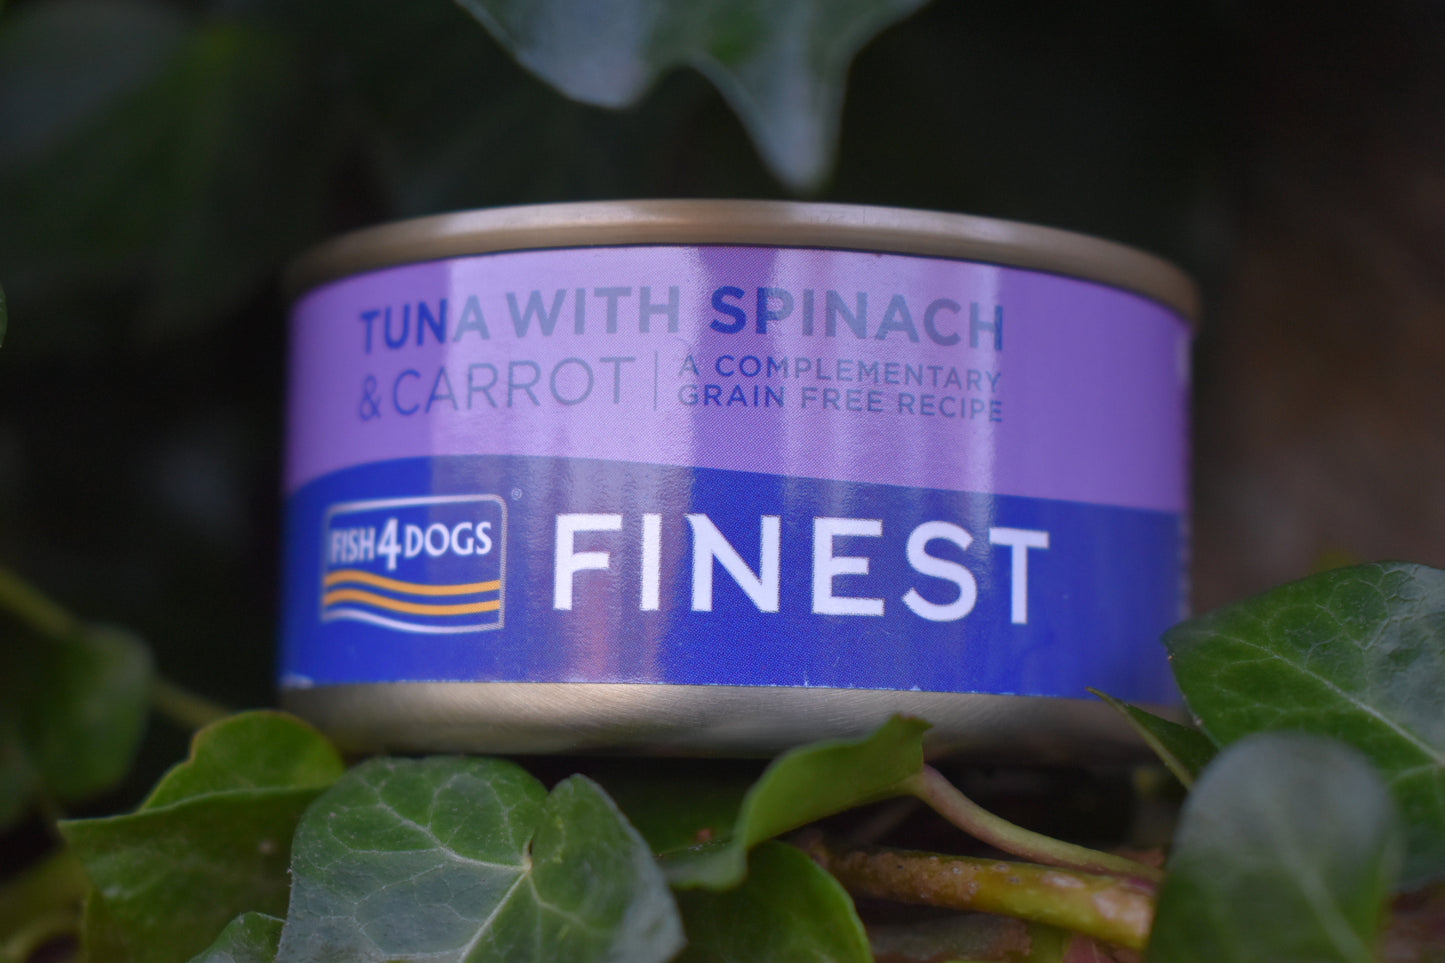 Fish4dogs Finest Tuna With Carrot & Spinach 85g